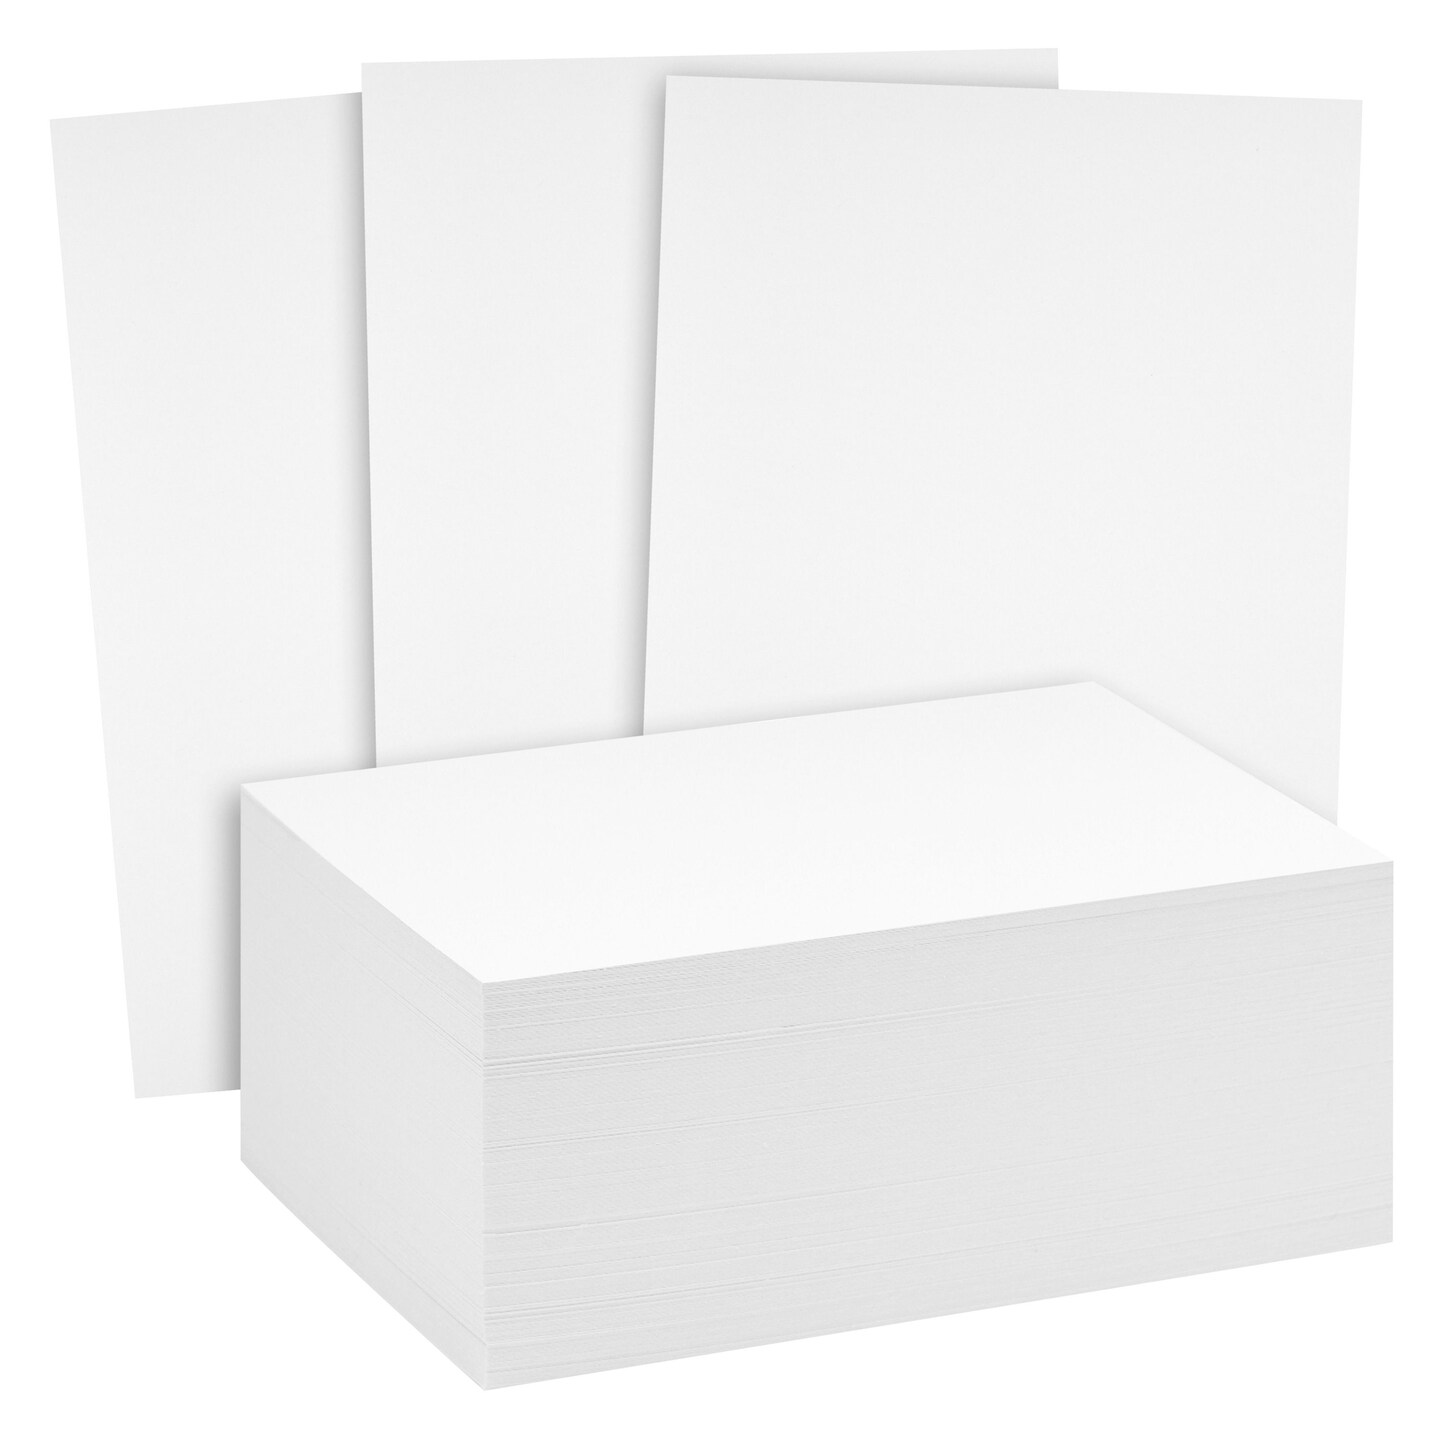 Greeting Cards Set - 5x7 Blank White Cardstock and Envelopes 